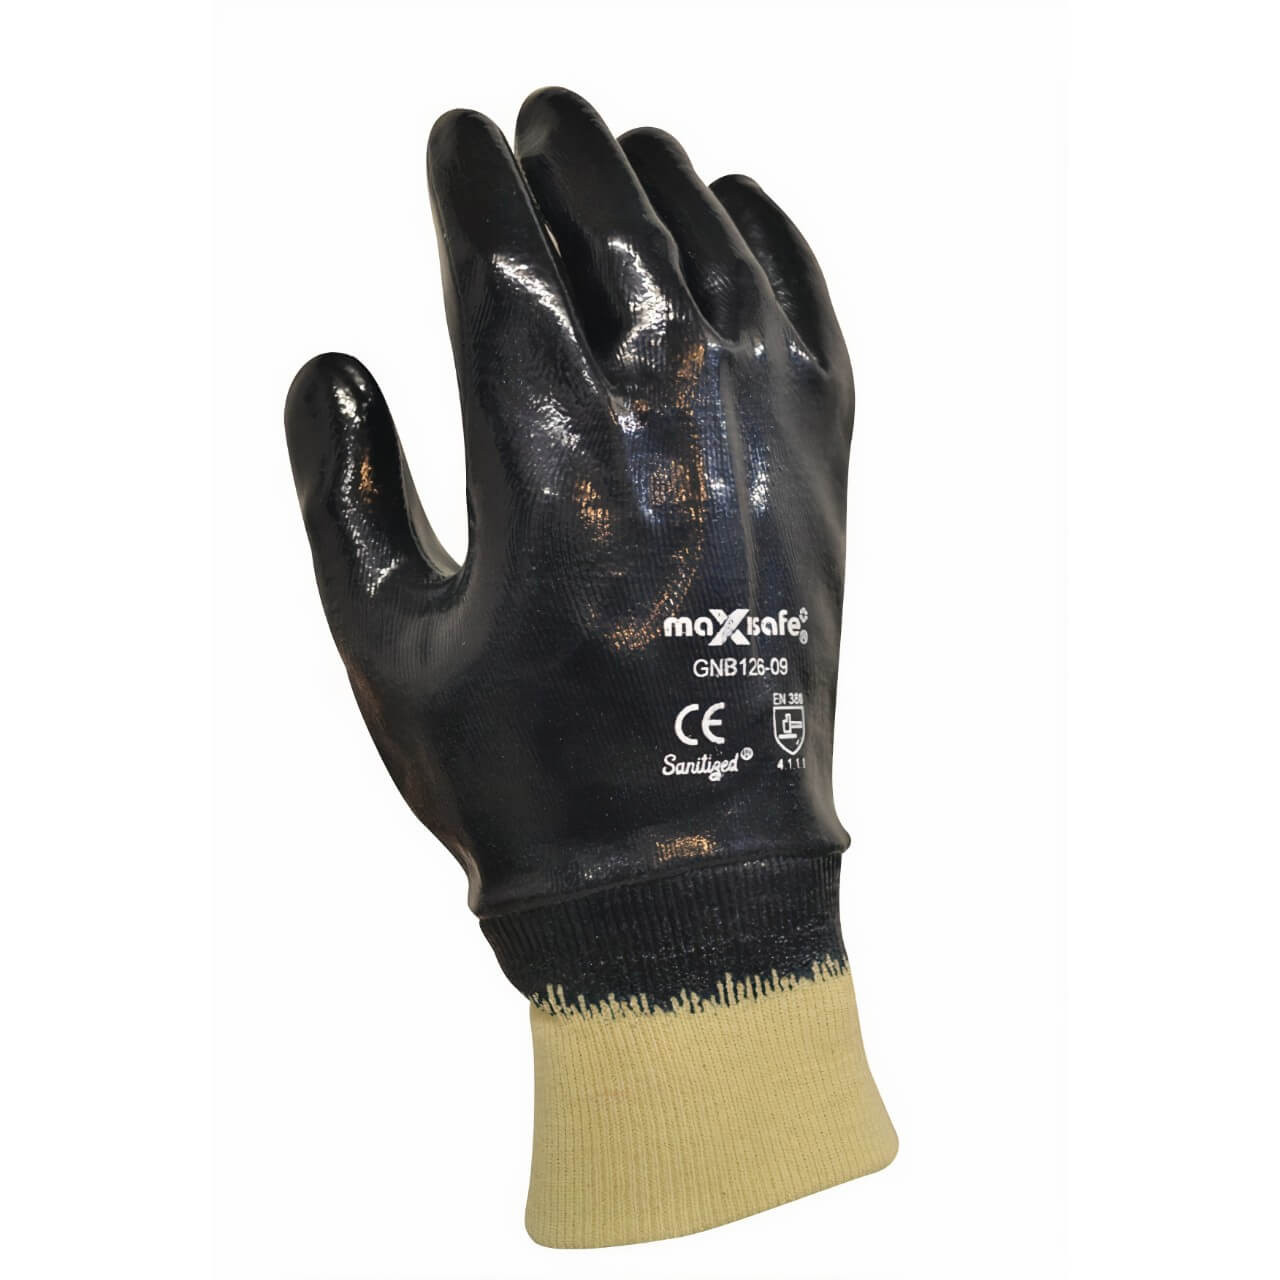 Maxisafe Blue Nitrile Fully Dipped Glove L